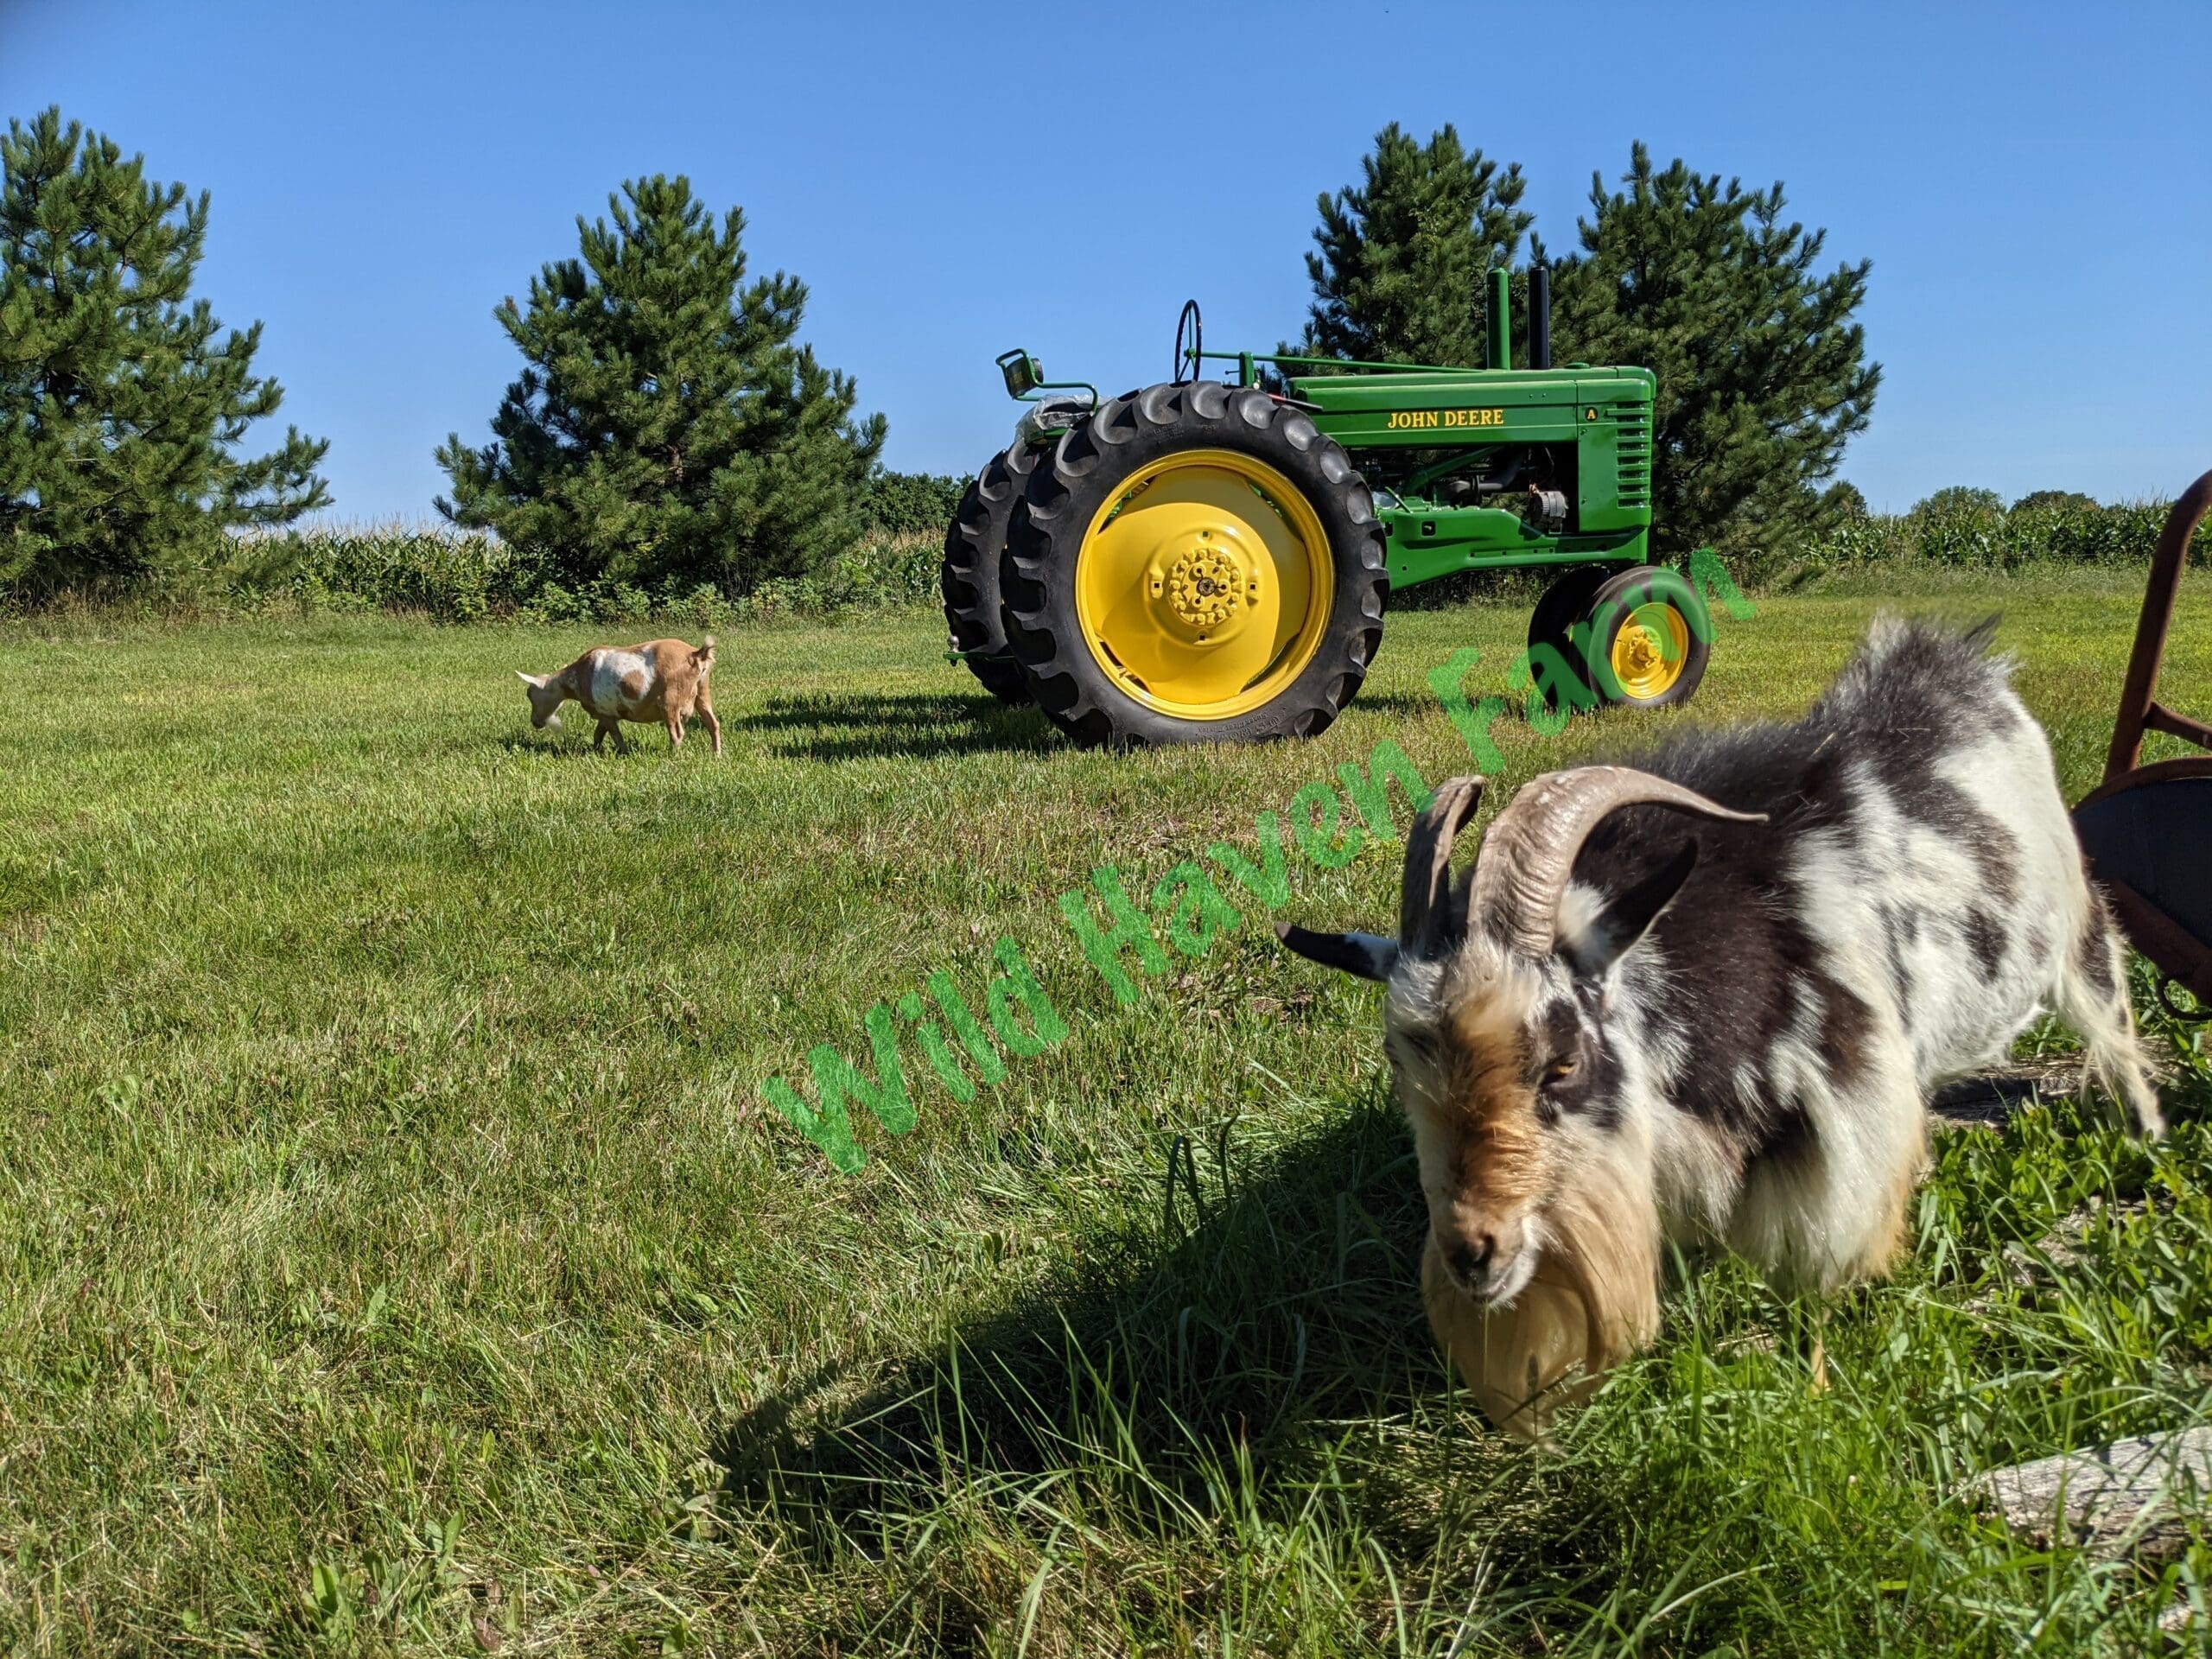 Nigerian Dwarf goats in a pasture with a John Deere Tractor